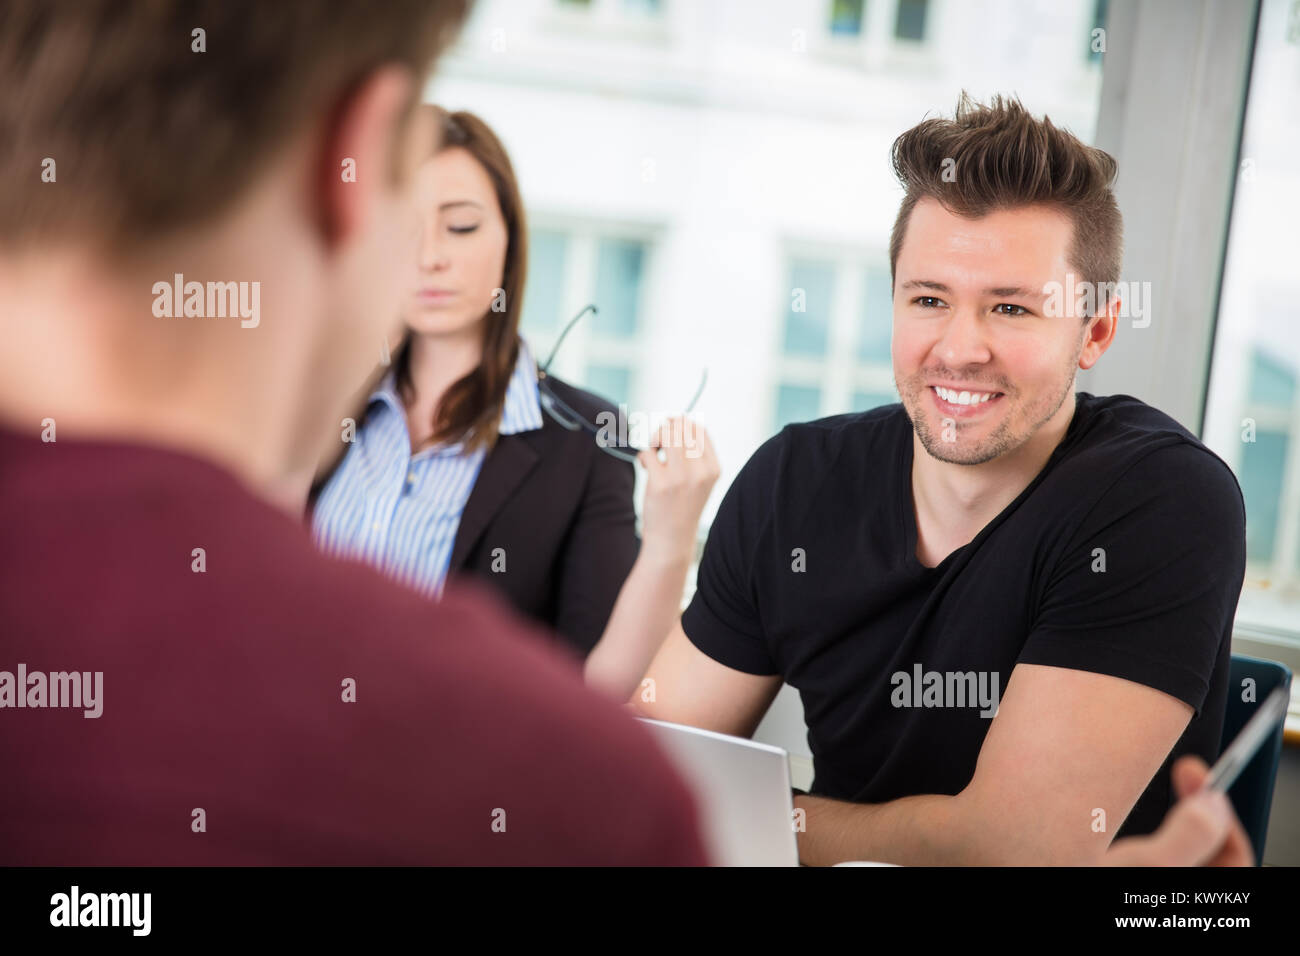 Businessman Smiling While Looking At Colleague Stock Photo